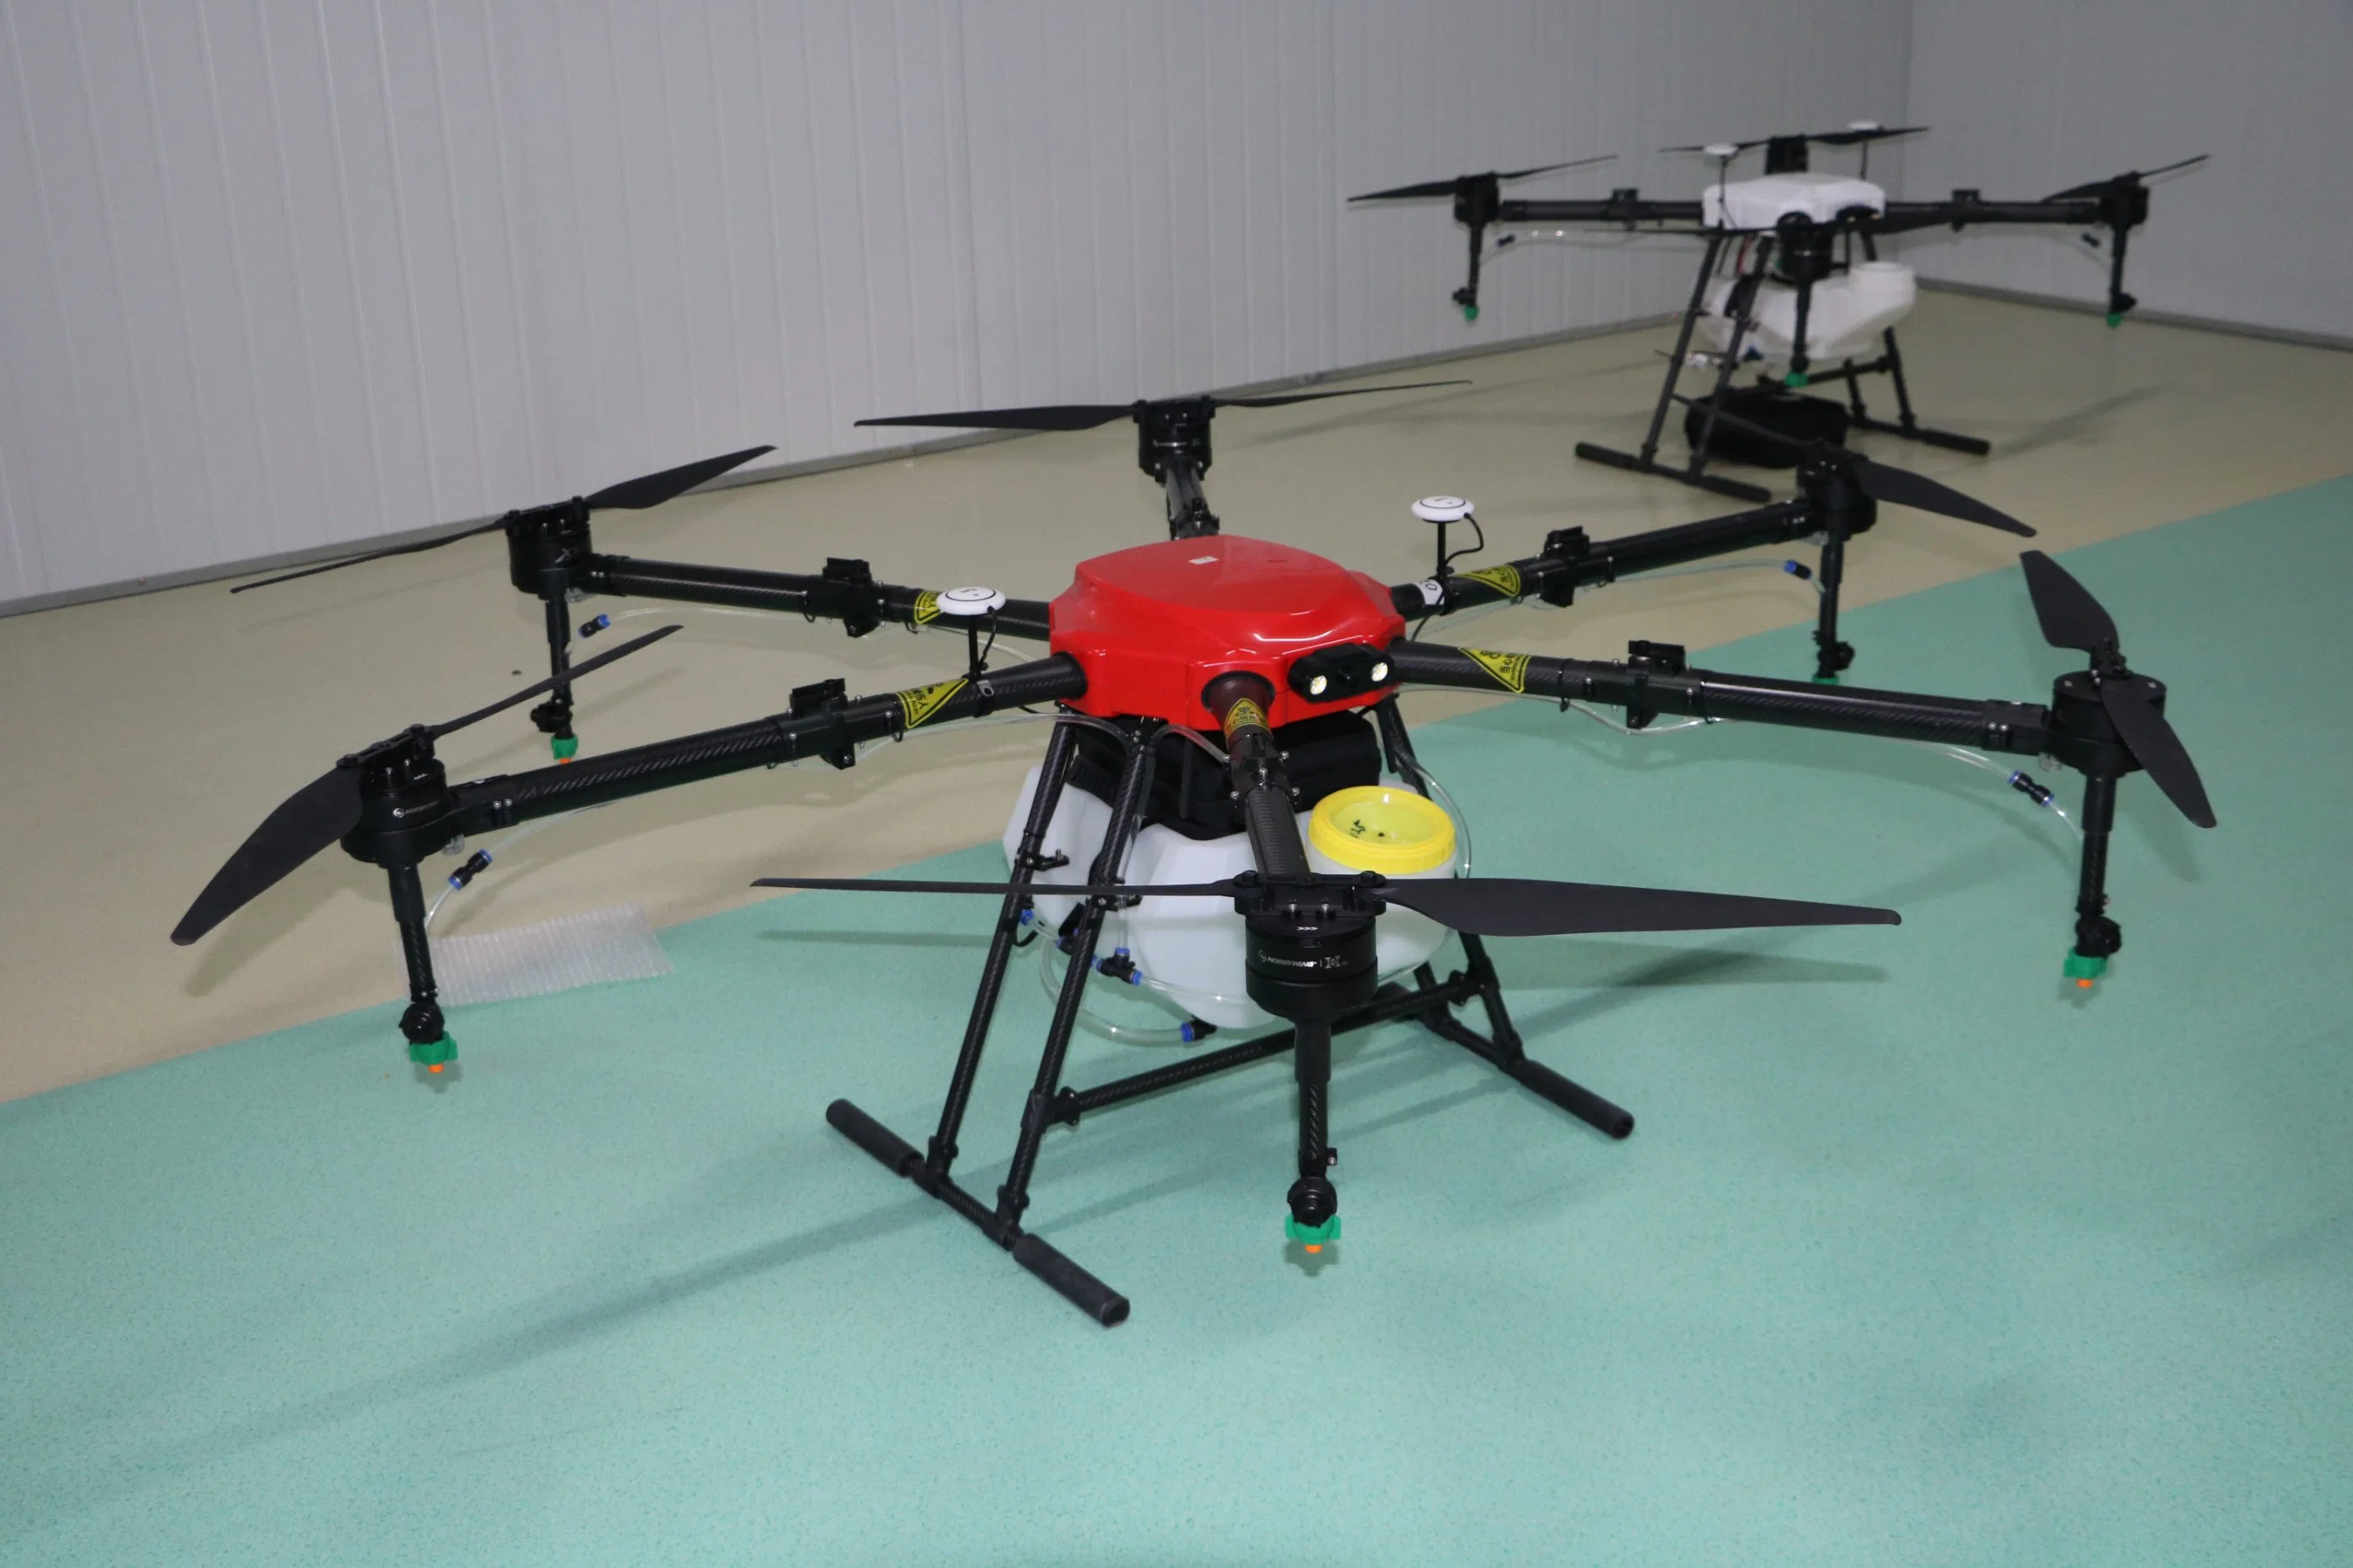 6 Axis Precision Agriculture Drone Uav 16kg Payloadfor Crop Spraying